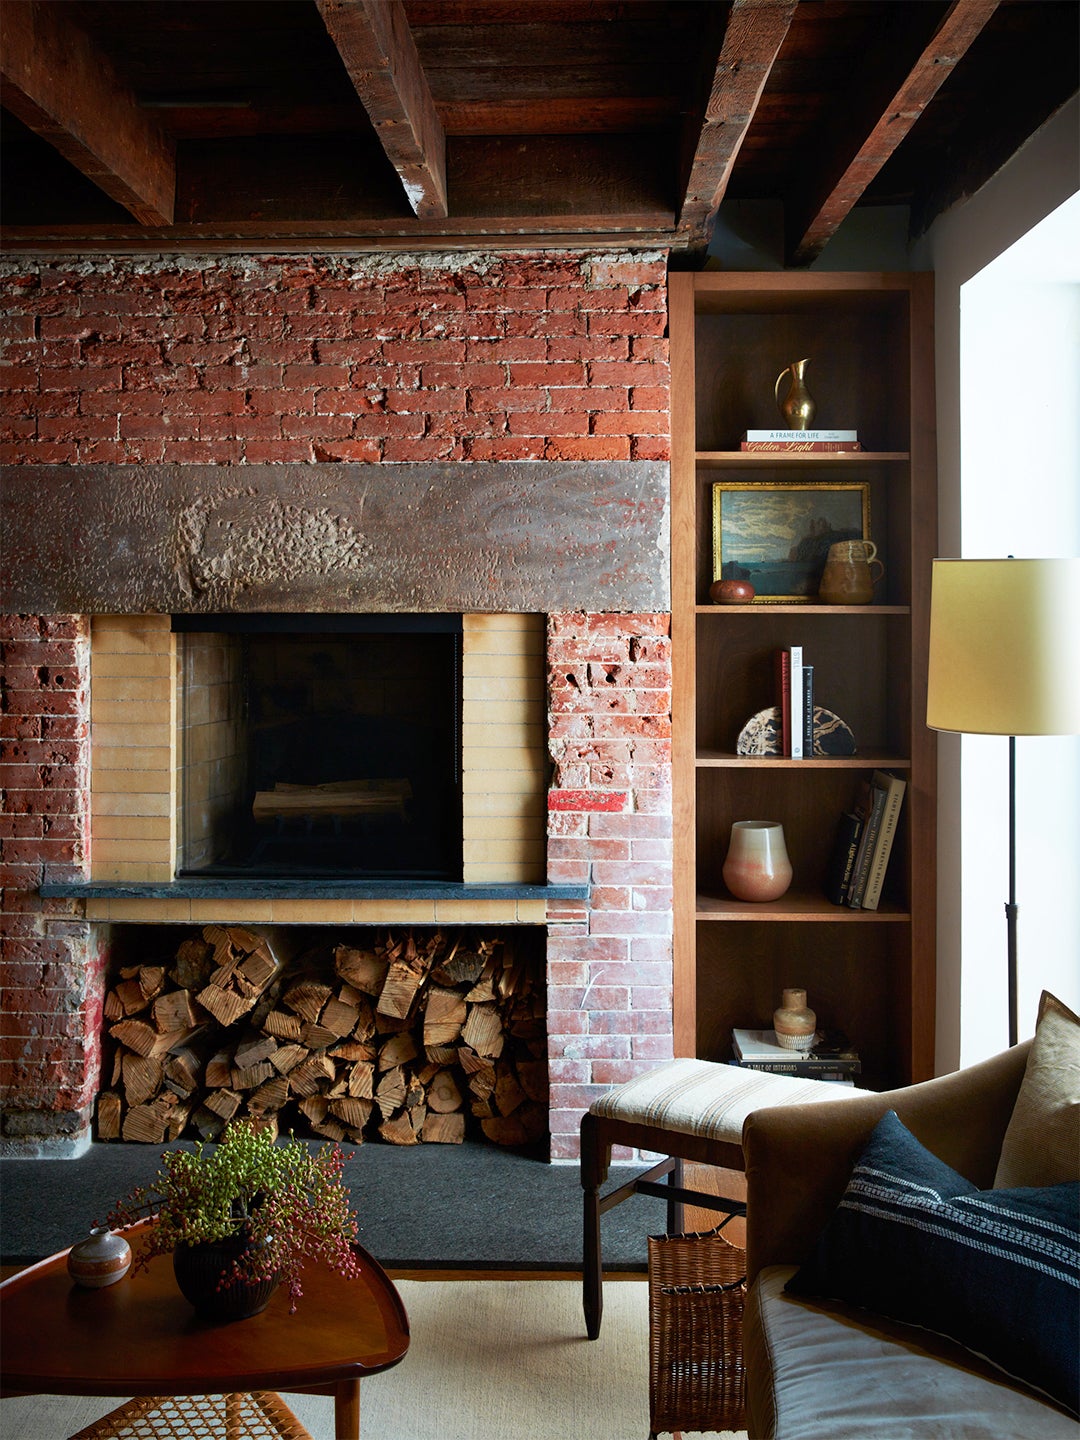 The Number-One Rule of Decorating a Space With Exposed Brick: Don't Use Too Much of This Color